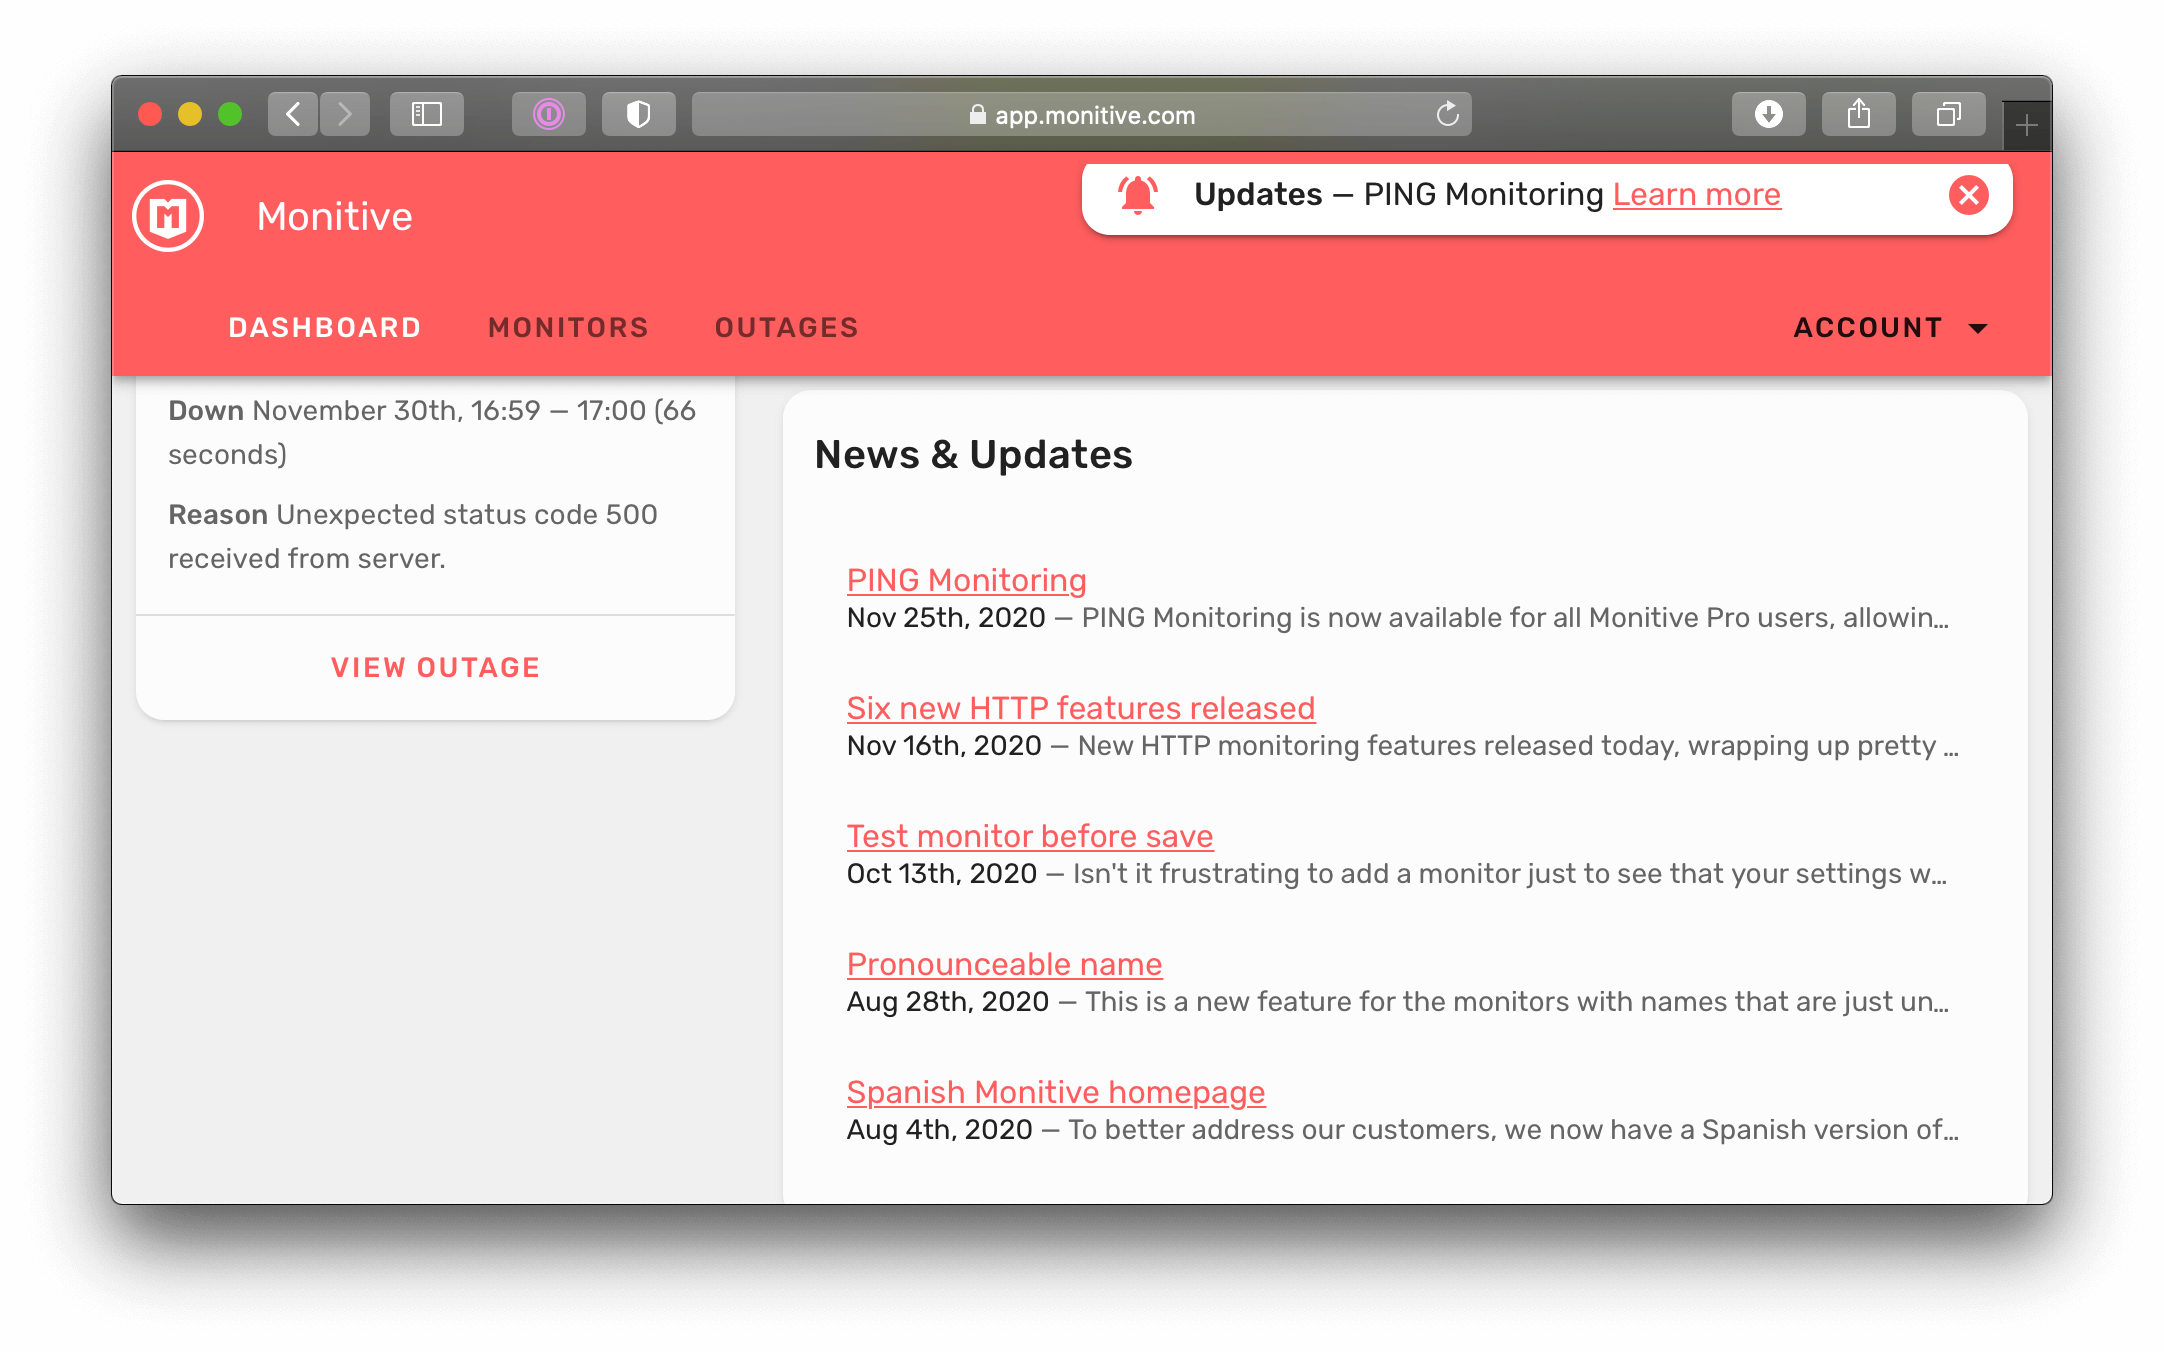 In-app news and updates